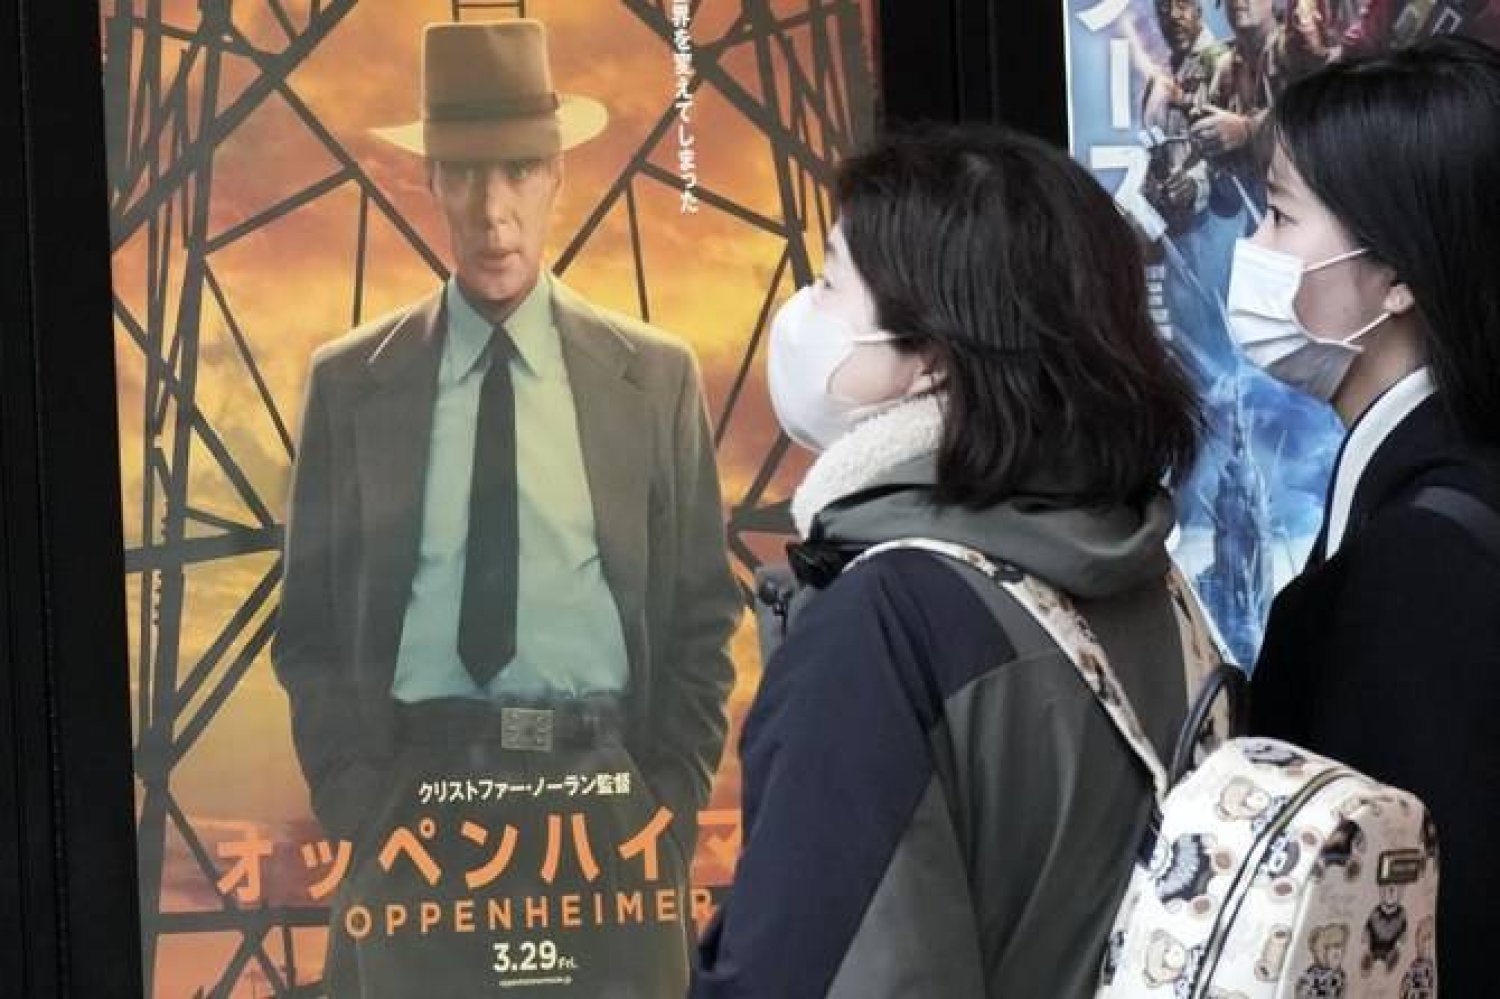 “Oppenheimer” has finally opened in the nation where two cities were obliterated by the nuclear weapons invented by the American scientist at the center of the film Japanese filmgoers’ reactions understandably were mixed and highly emotional. (AP)
